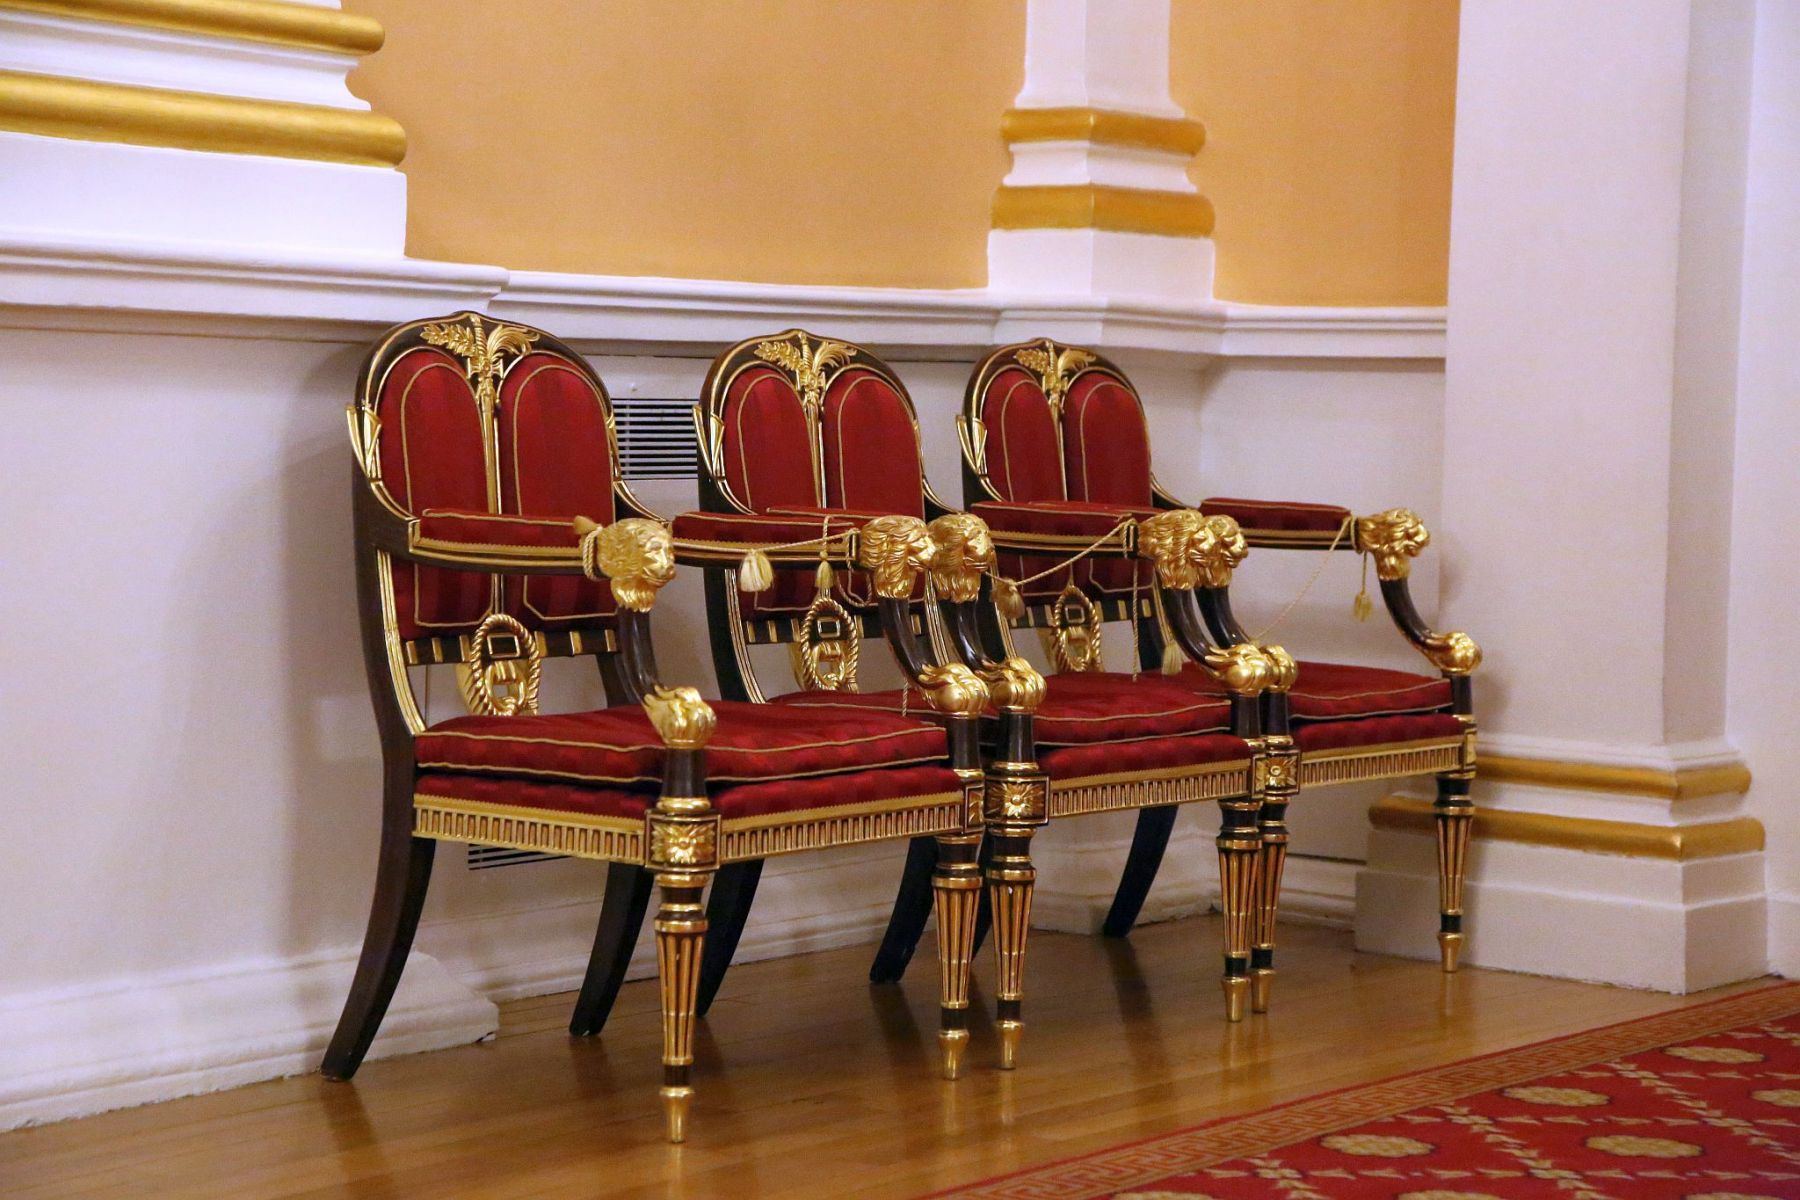 Three chairs at The Mansion House, home to the Lord Mayor of the City of London.